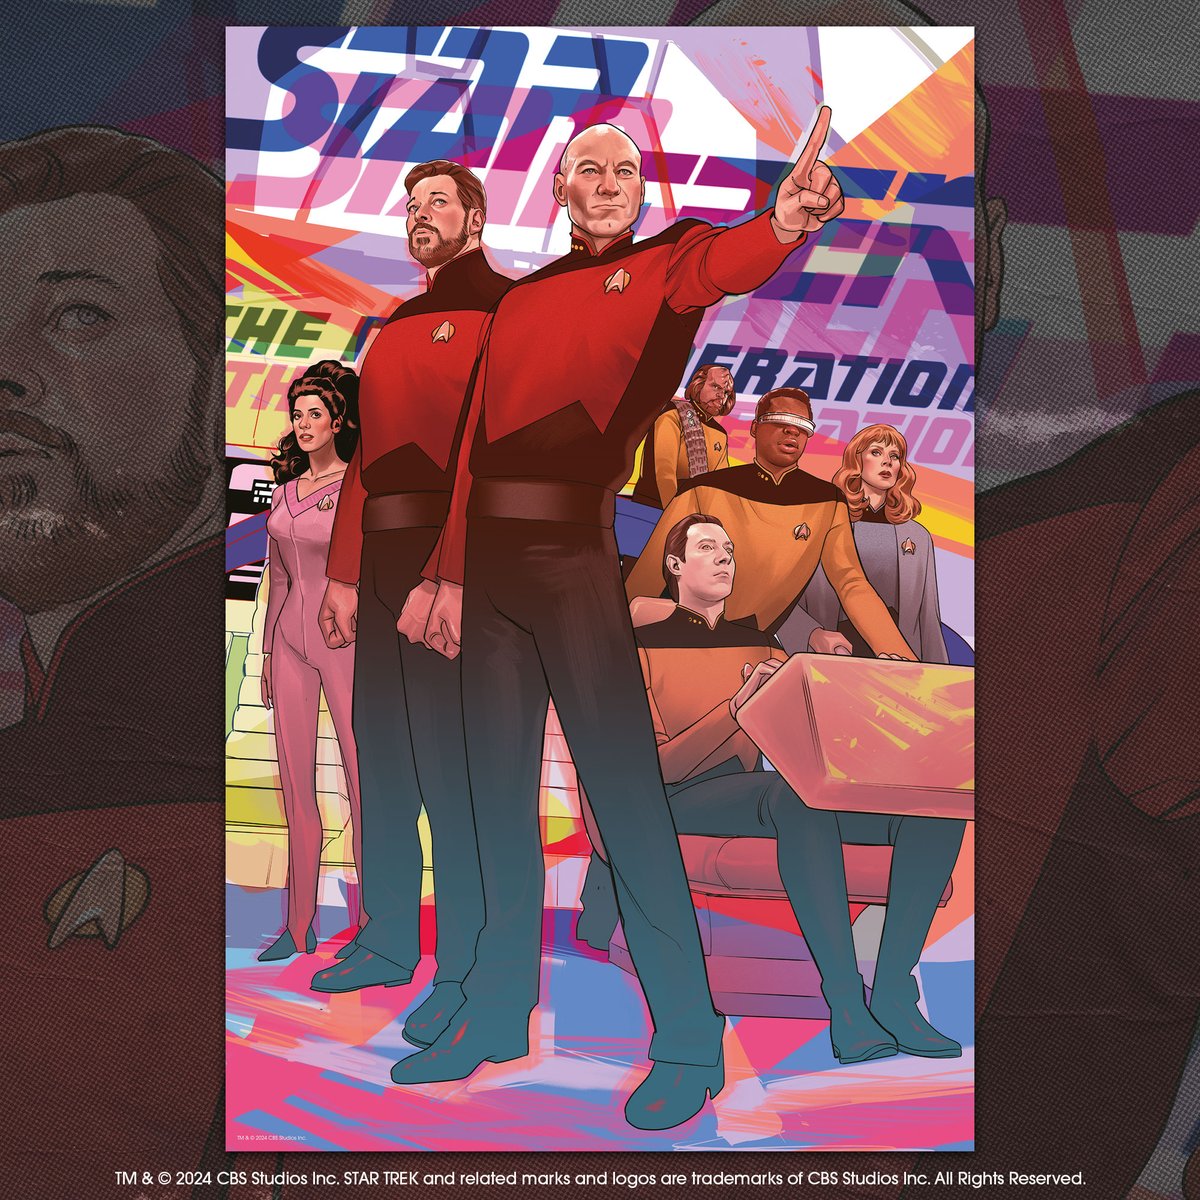 .@VicePressNews announces a new #StarTrek TNG poster by @RachaelAtWork, limited to 200 prints. Preorders launch Thursday 9 May at Vice-Press.com